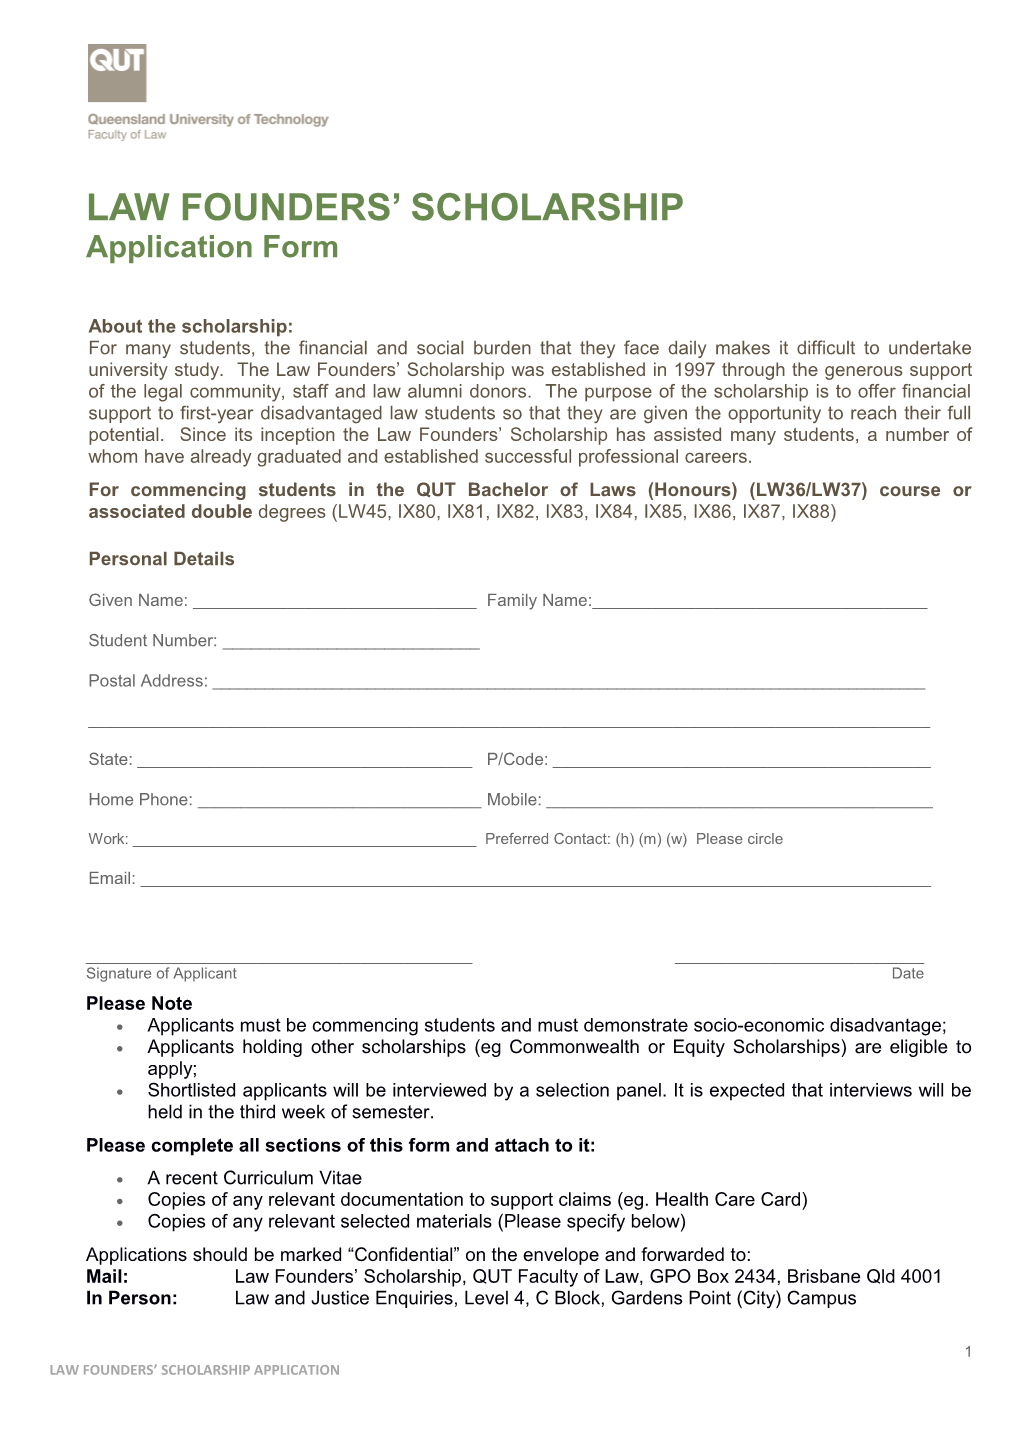 Law Founders Scholarship Application